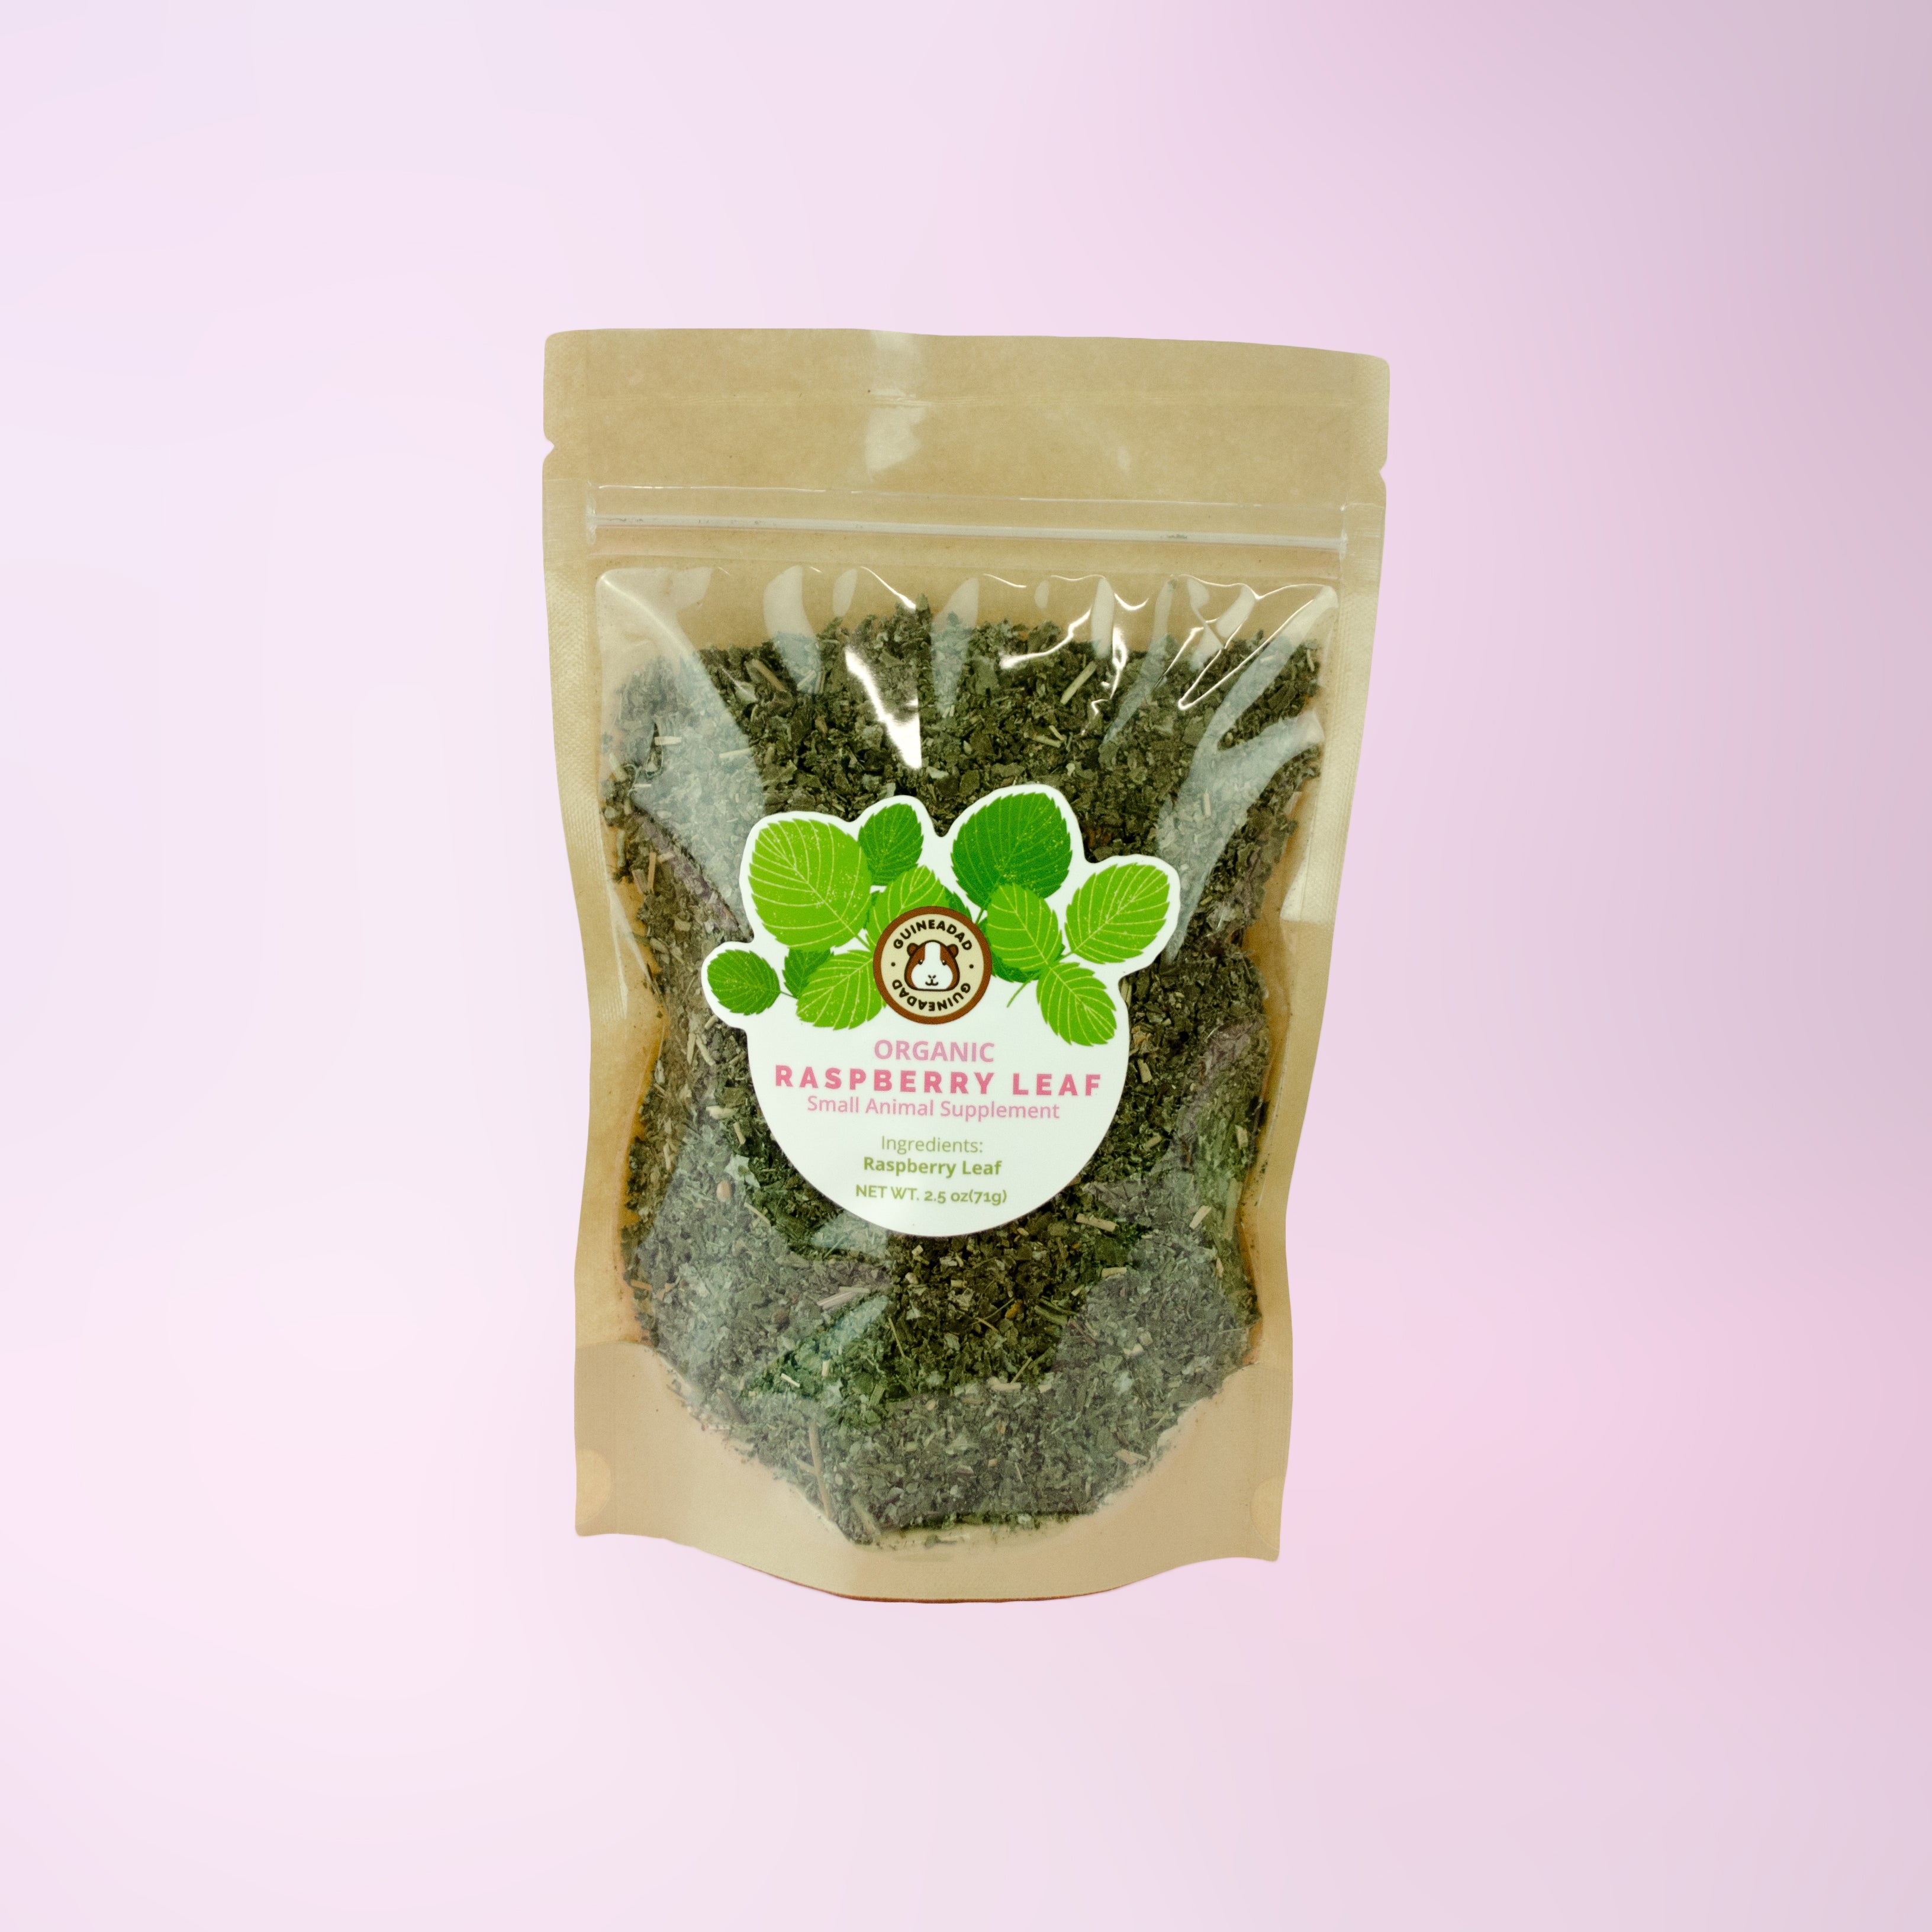 raspberry leaf herbal treat for small animals